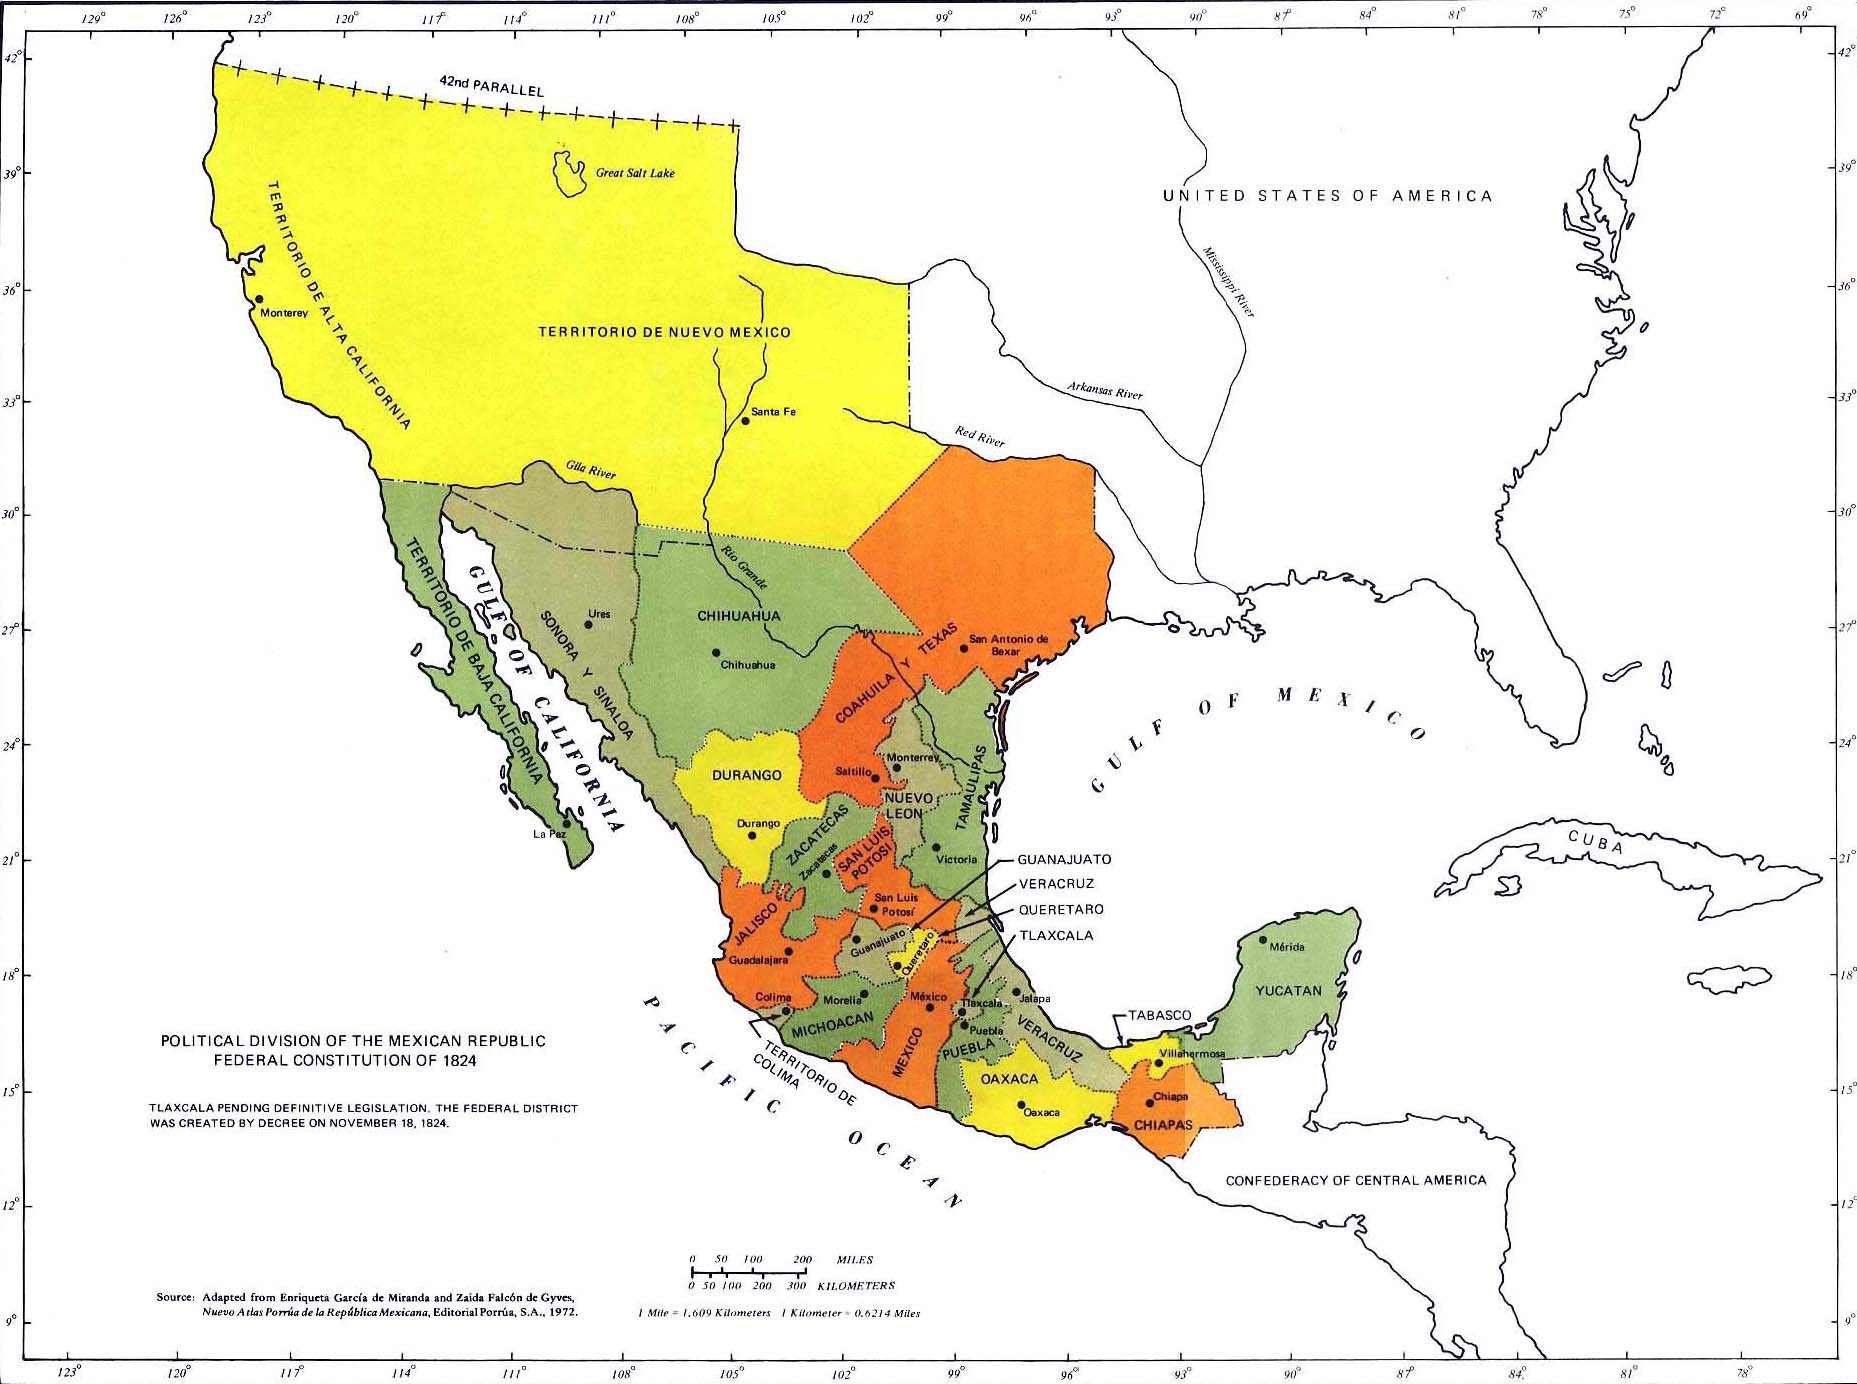 Mexico - Political Division of the Mexican Republic Federal Constitution of 1824